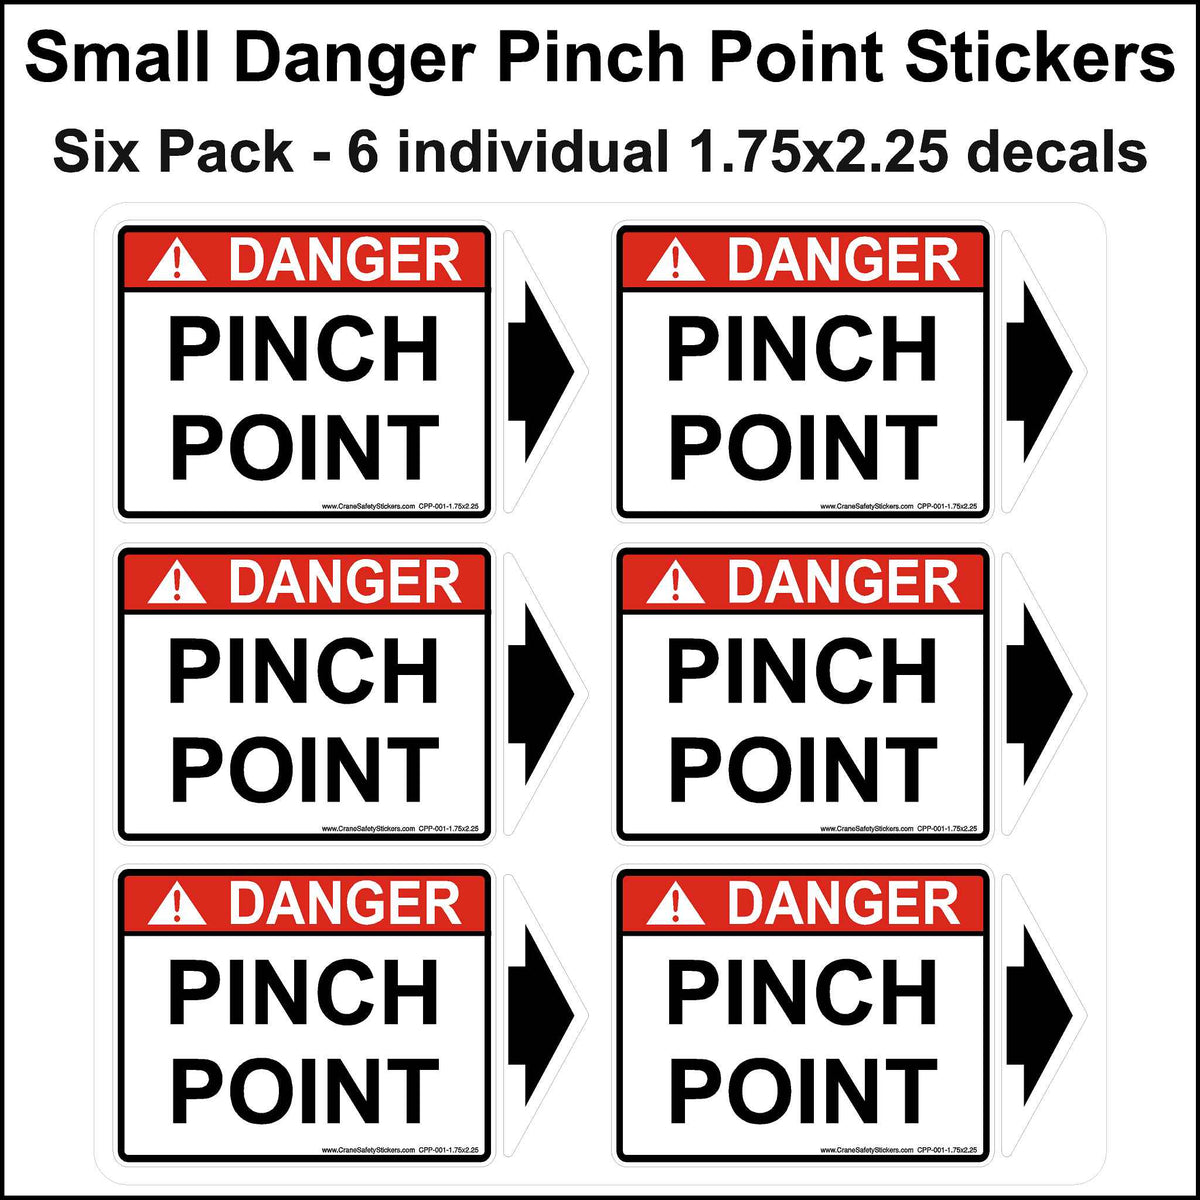 Pinch Point Stickers 6 pack Small 1 3/4 inch by 2 1.4 inch in size.